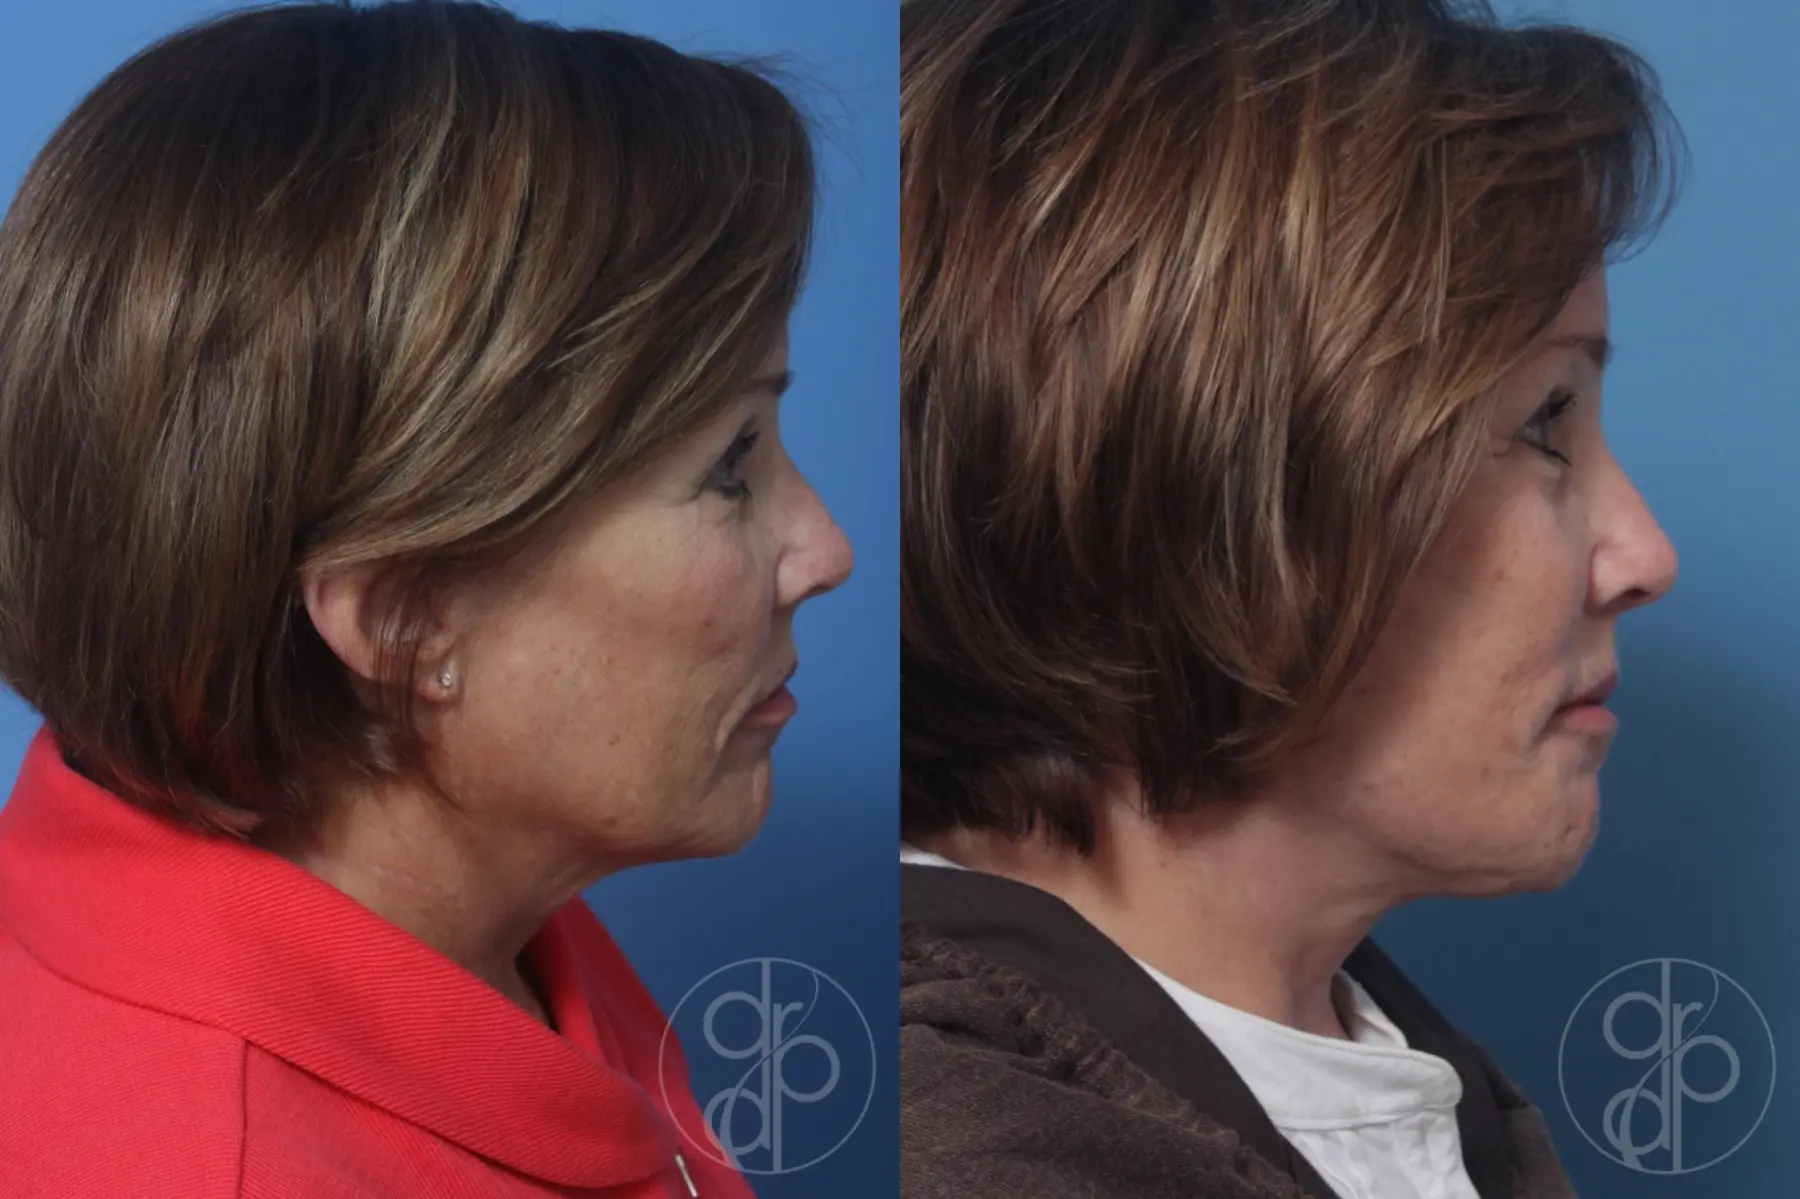 patient 10505 facelift before and after result - Before and After 4